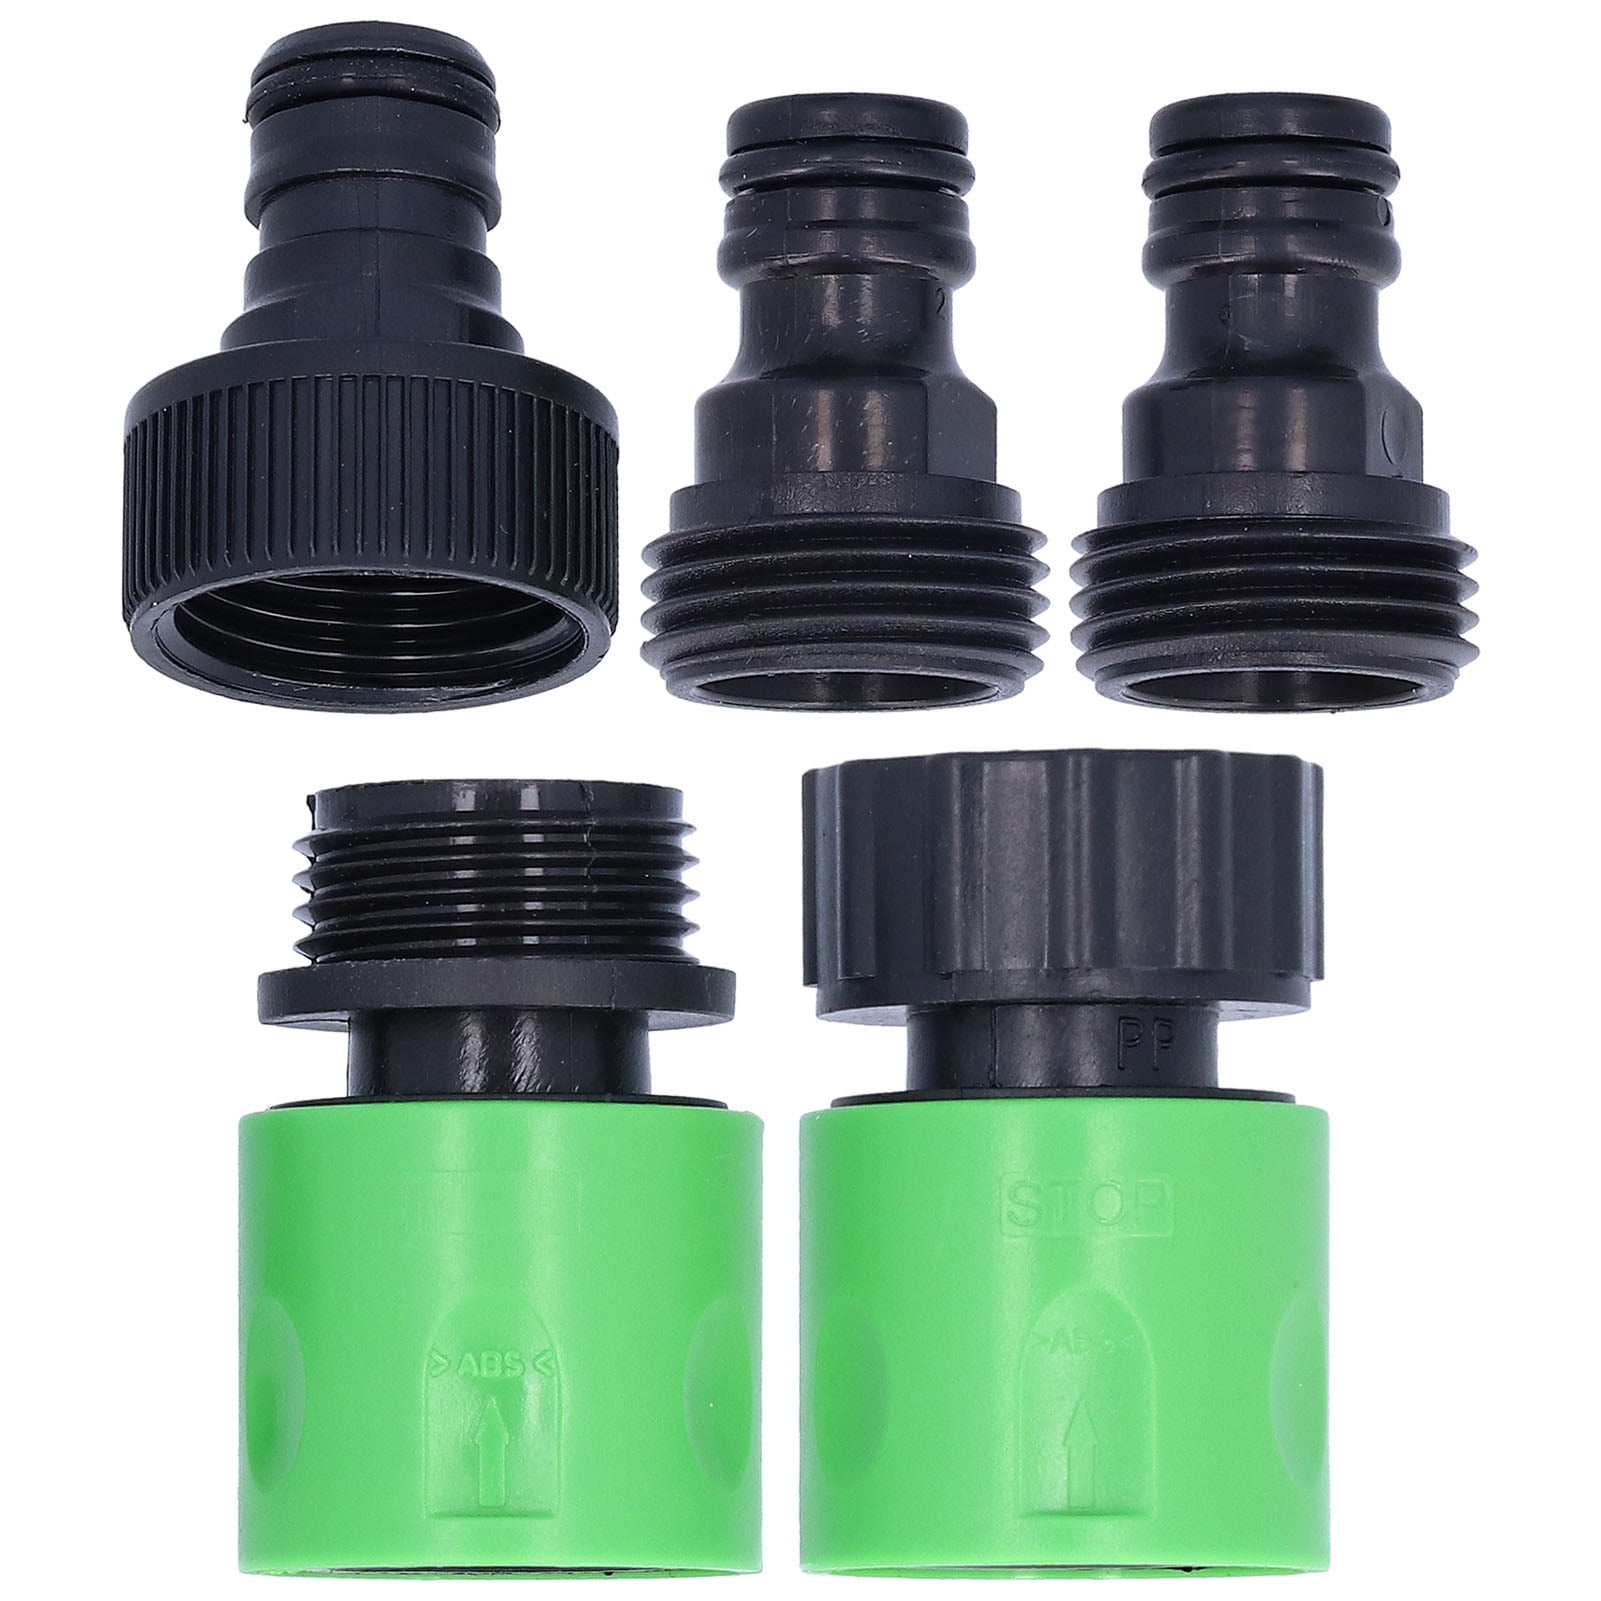 1" ideal ™ Hose Coupling Hose Connector Manifold with reduzierrung on 1/2" 